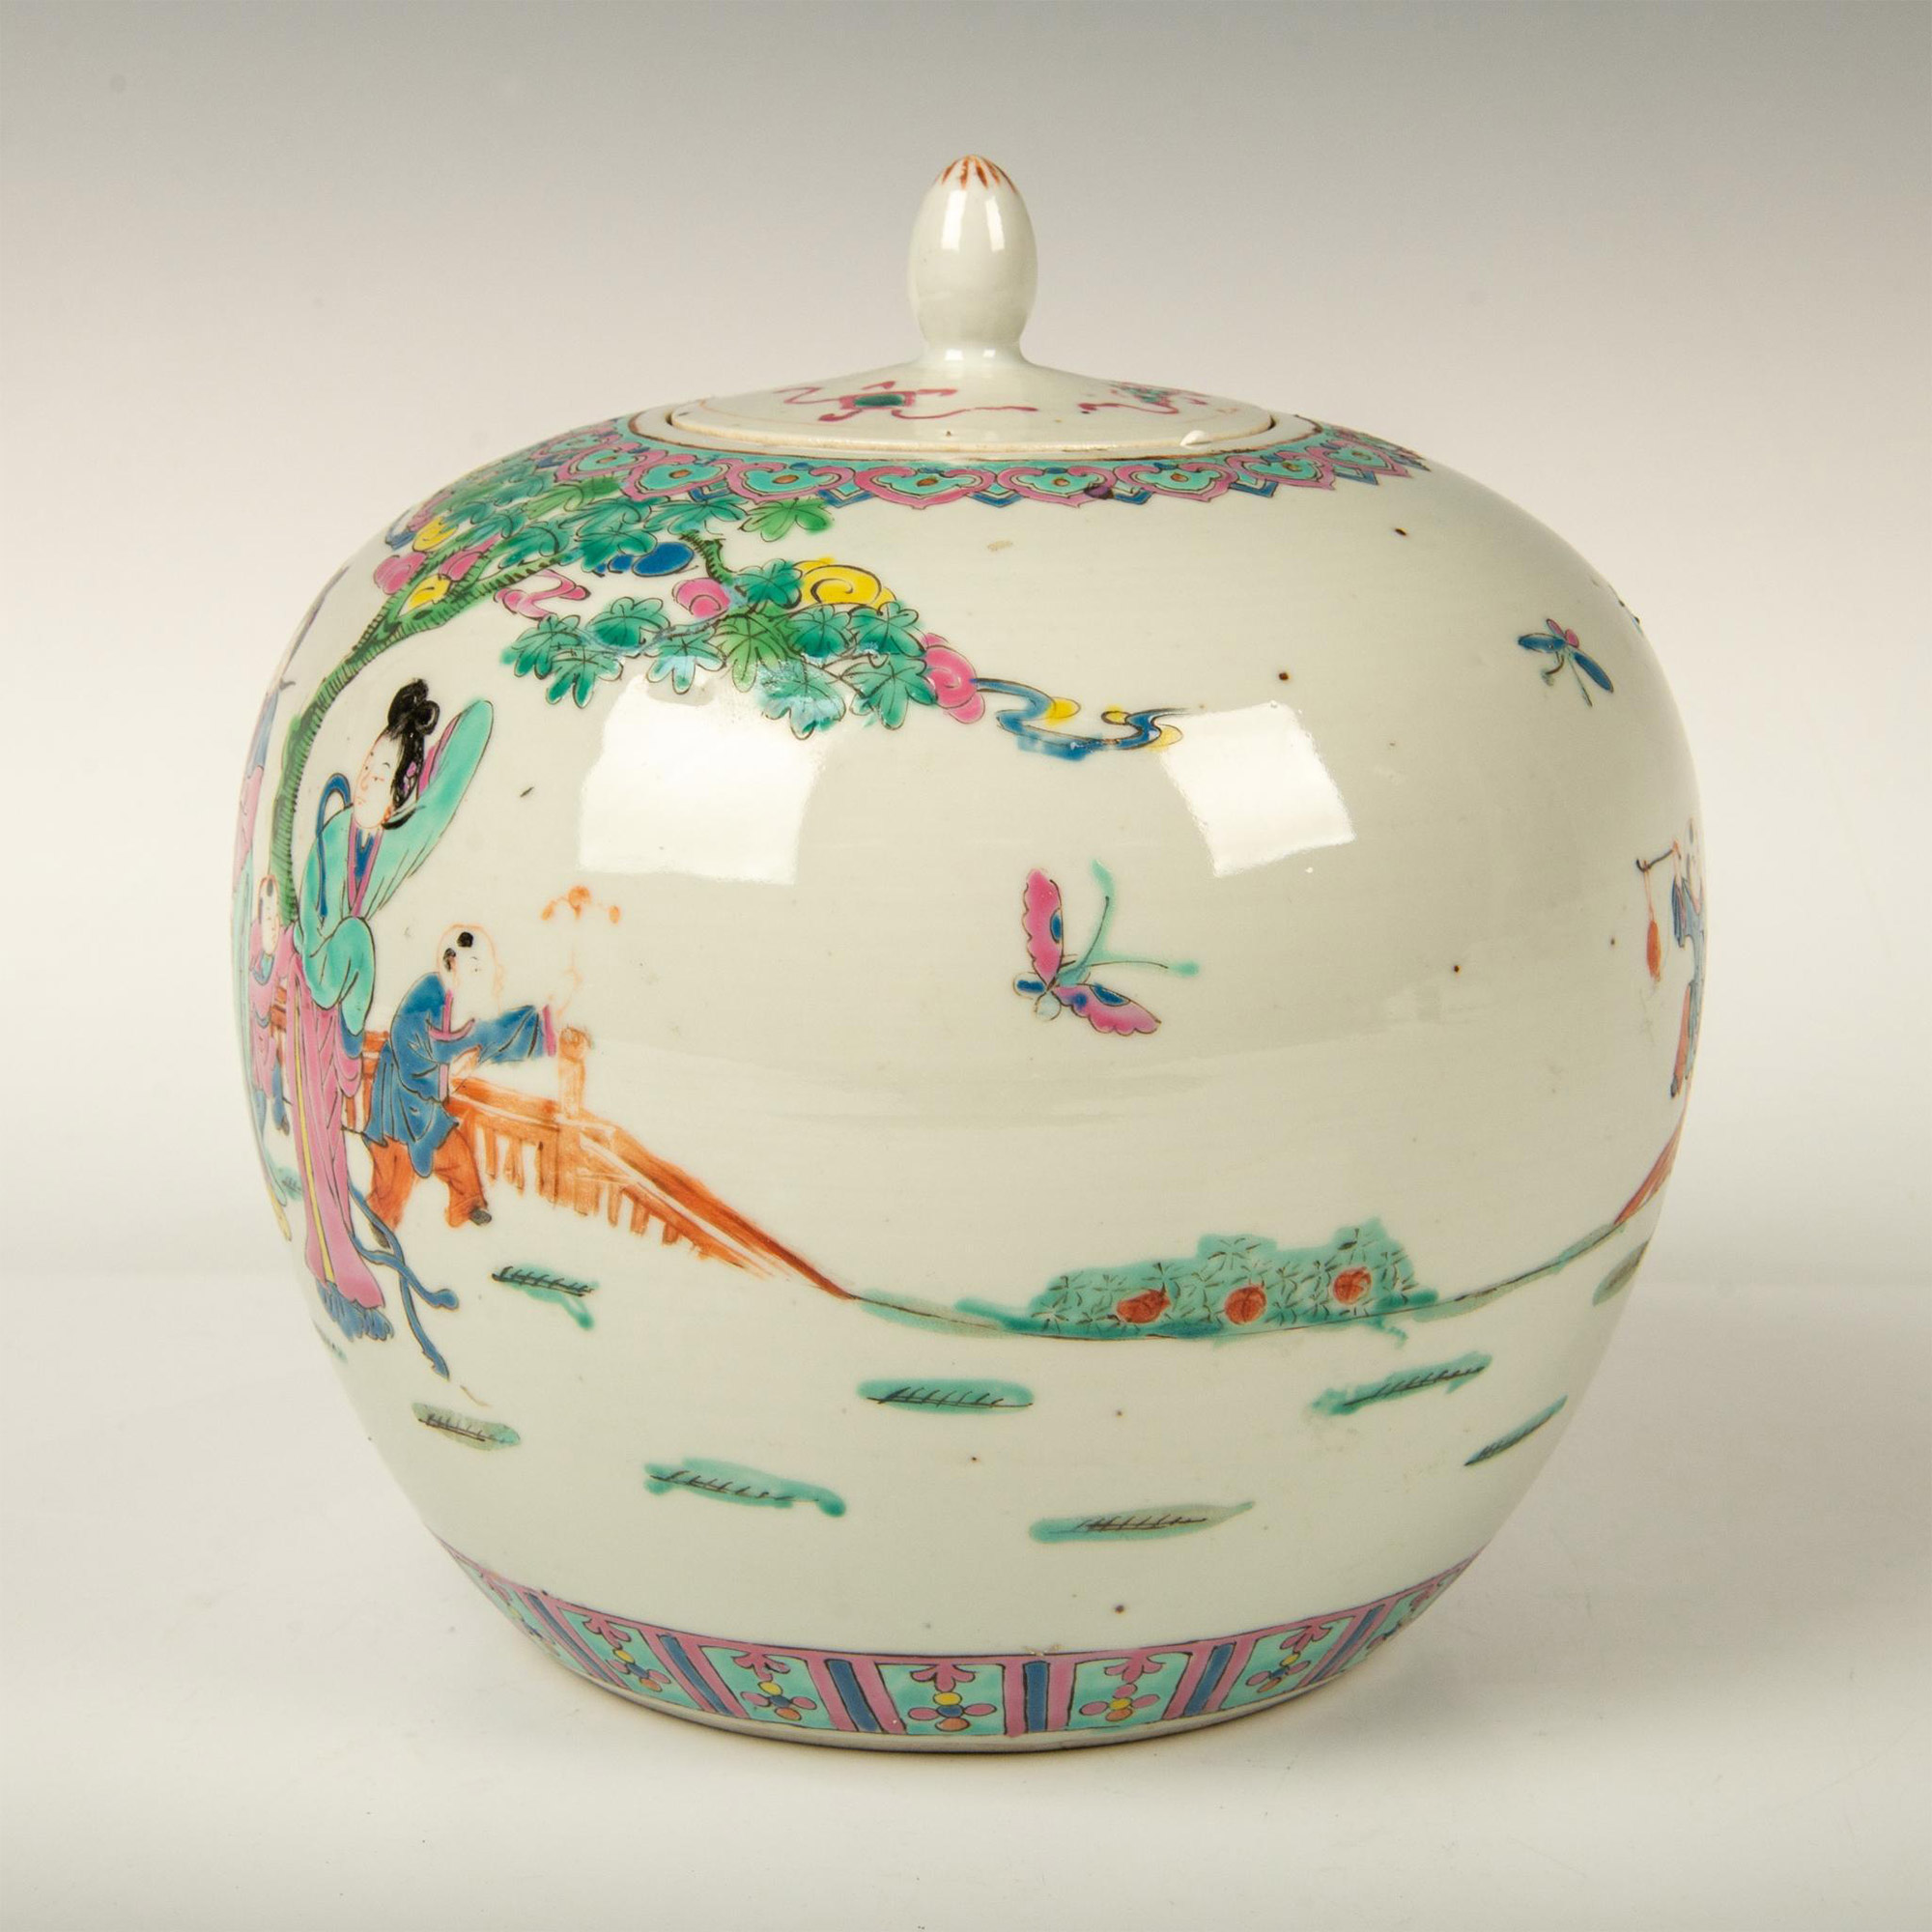 Antique Chinese Porcelain Covered Ginger Pot - Image 3 of 6